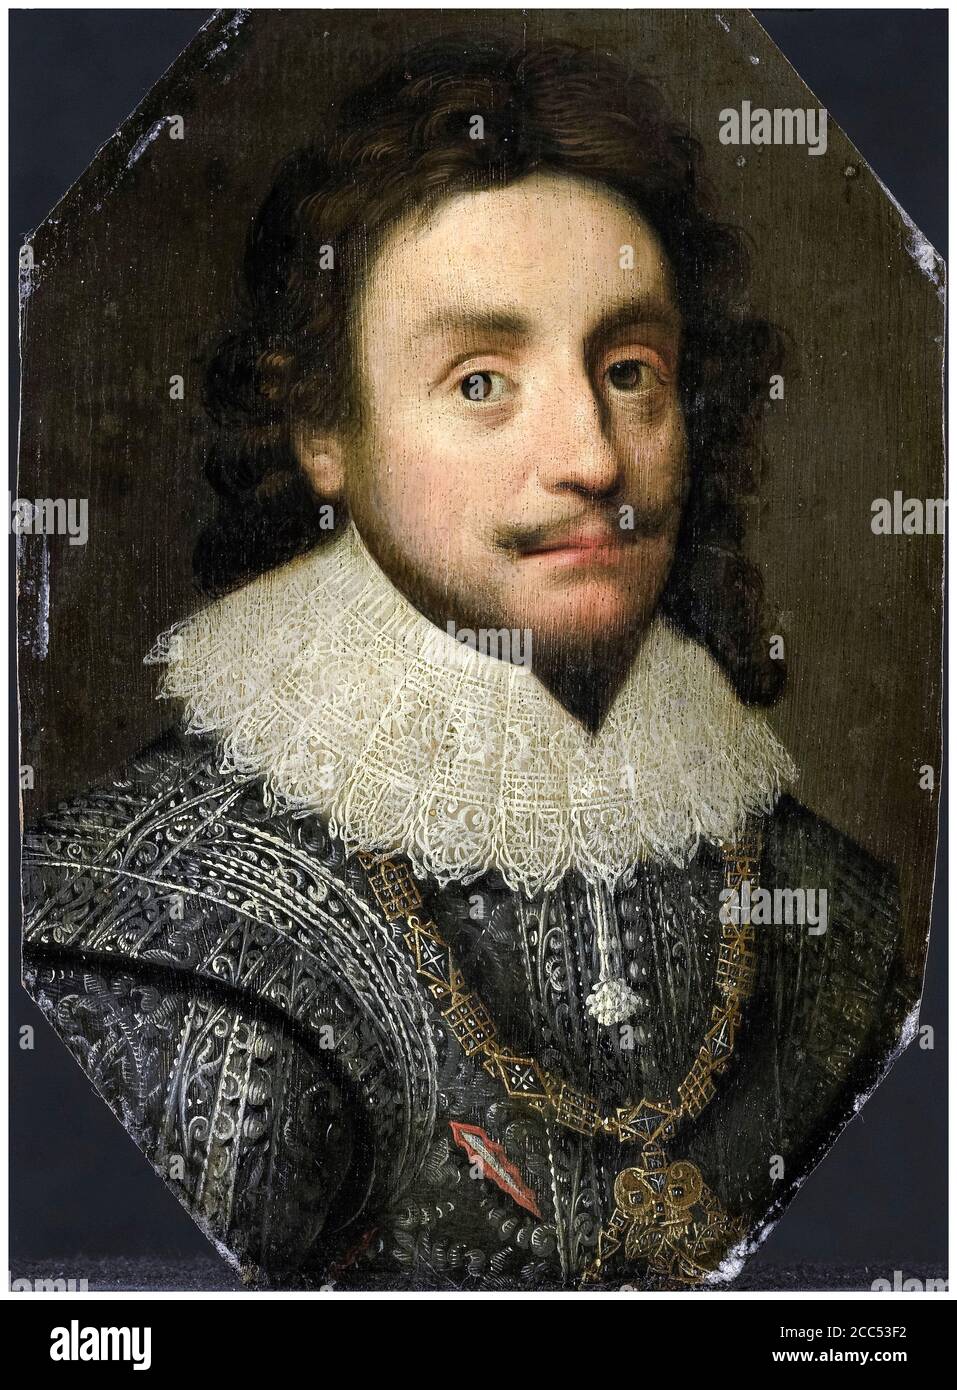 Frederick V (1596-1632), Elector Palatine, King of Bohemia, portrait painting by after Michiel Janszoon van Mierevelt, after 1621 Stock Photo